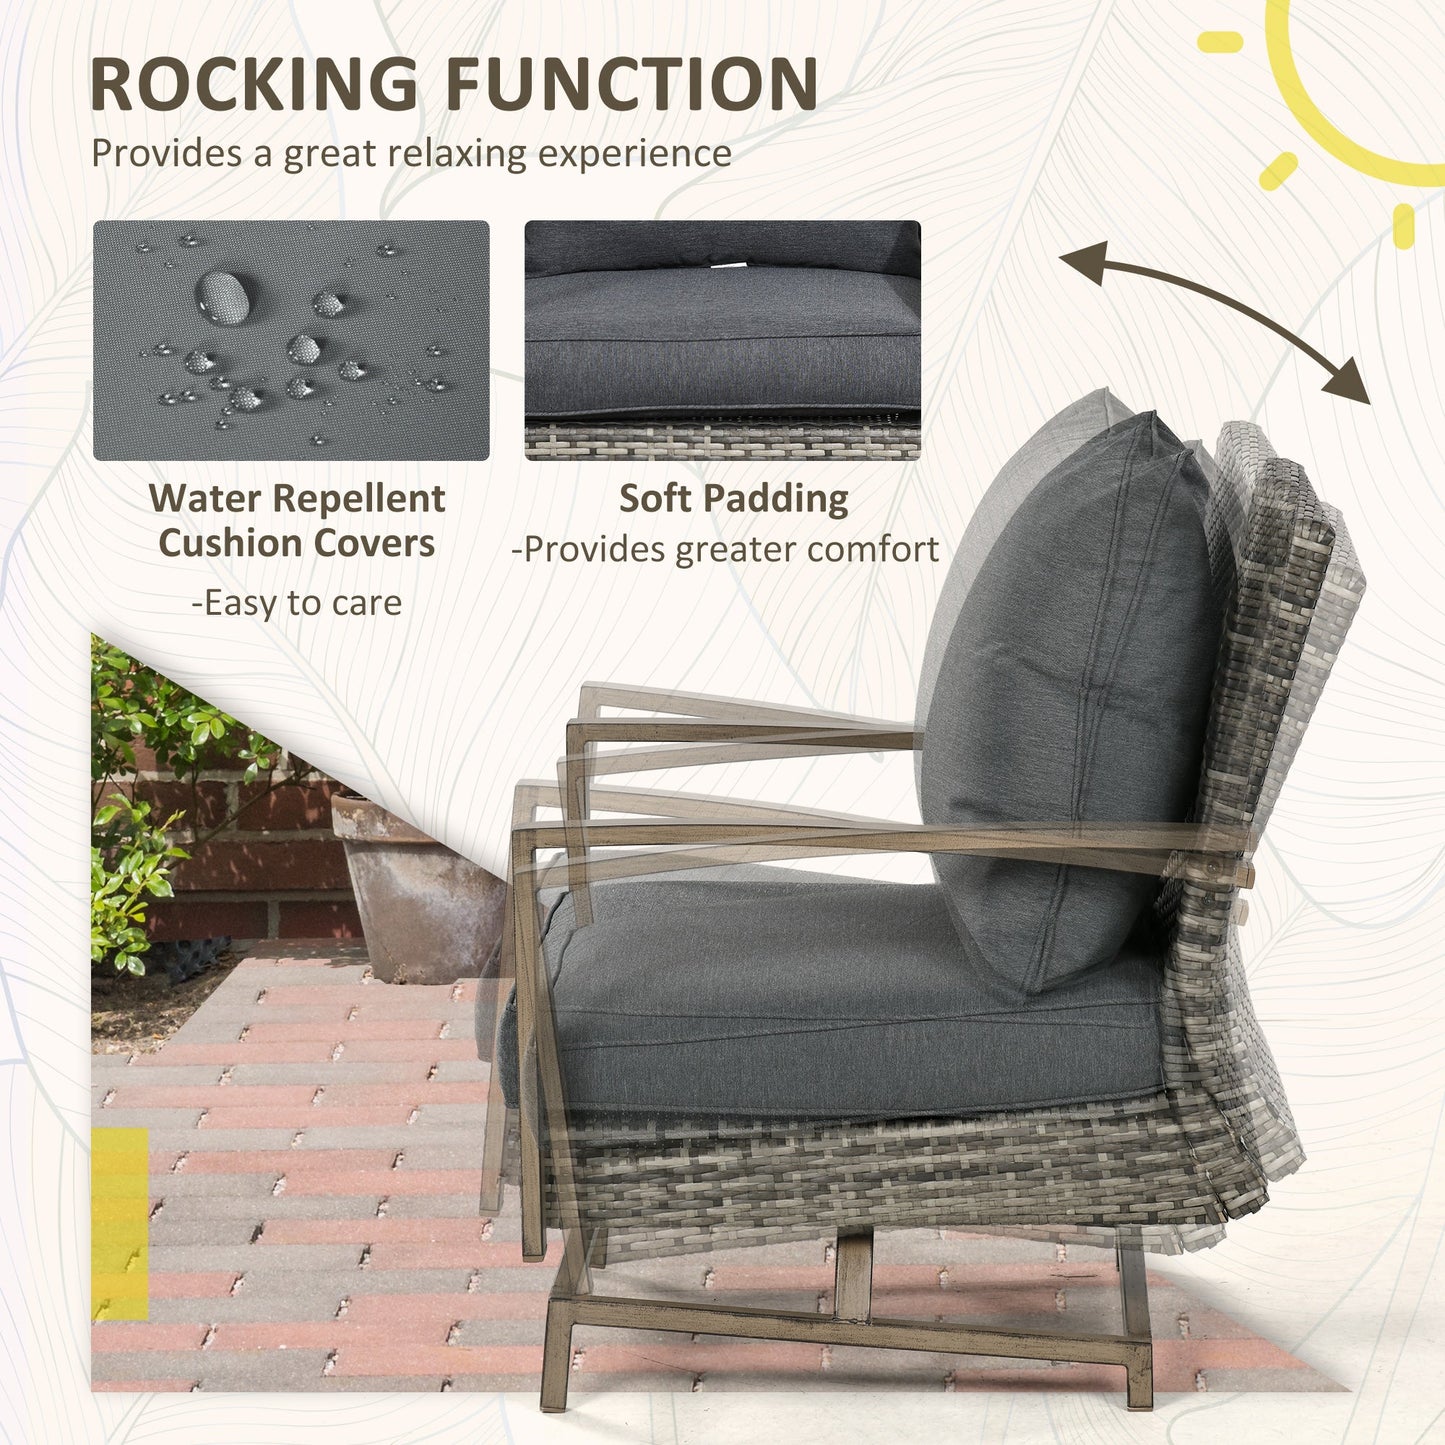 Outdoor and Garden-Patio Bistro Set, Porch Furniture with Soft Cushions and Rocking Function for Yard, Lawn, Porch, Dark Gray - Outdoor Style Company